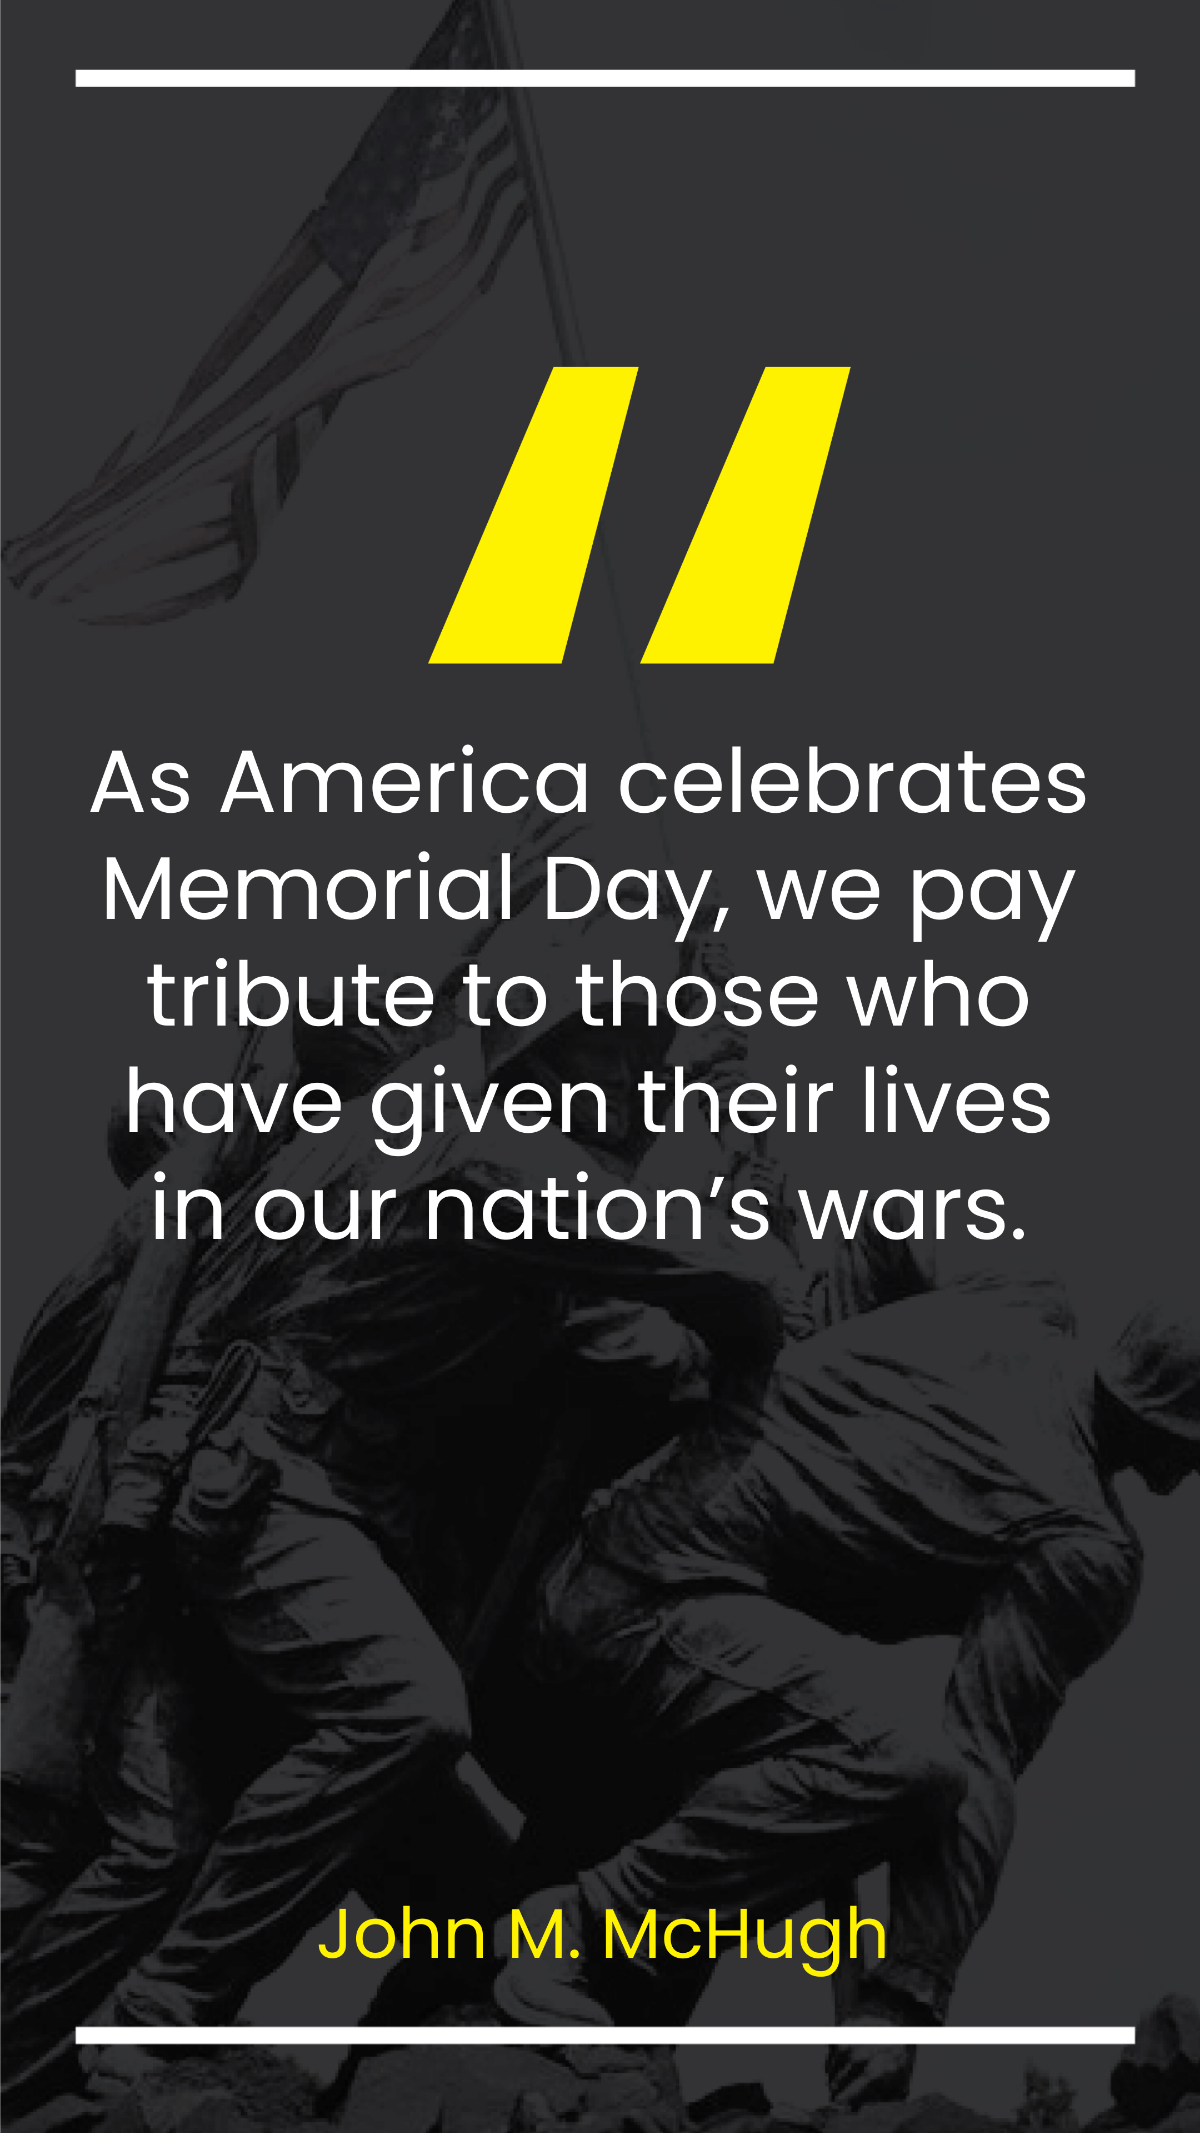 John M. McHugh - As America celebrates Memorial Day, we pay tribute to those who have given their lives in our nation's wars.